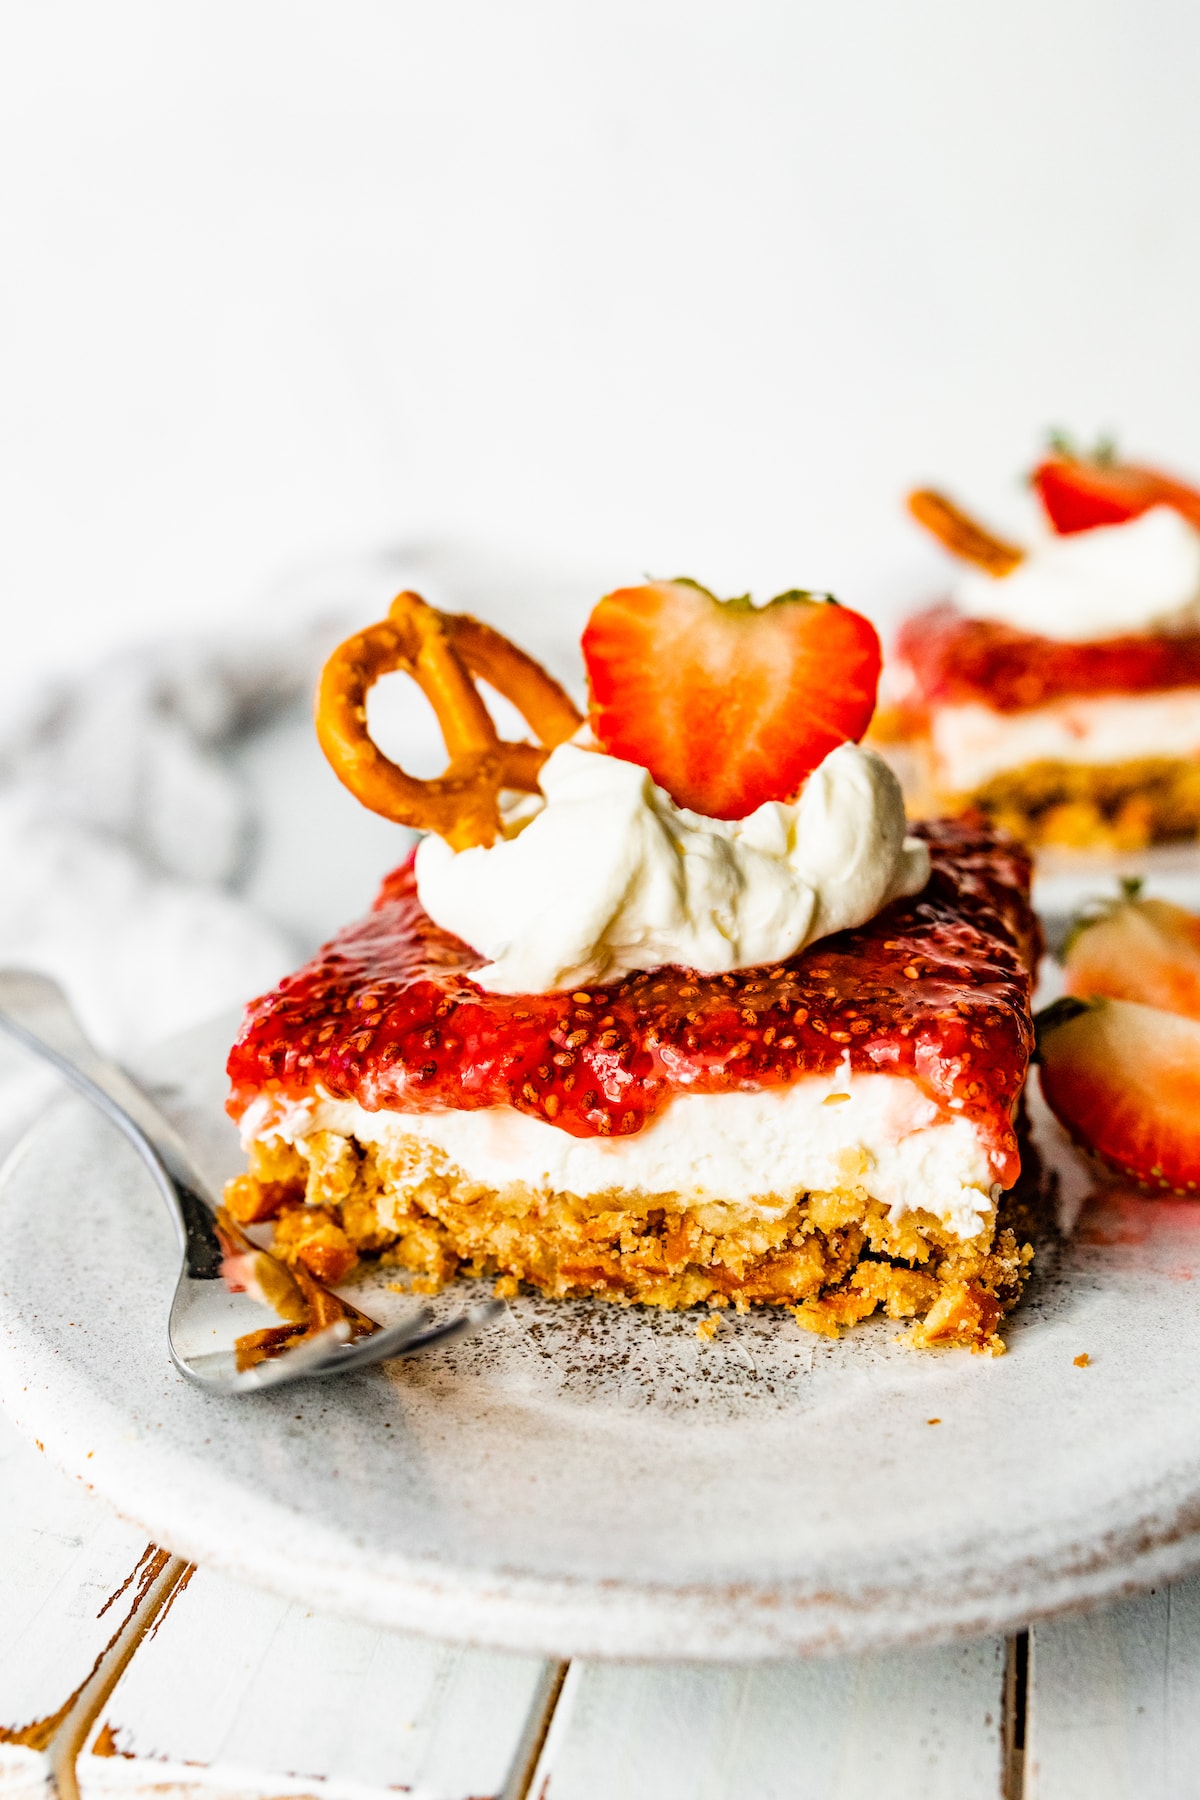 A slice of strawberry pretzel salad on a small plate with a metal fork. The slice is topped with a dollop of whipped cream, a sliced strawberry, and a pretzel.